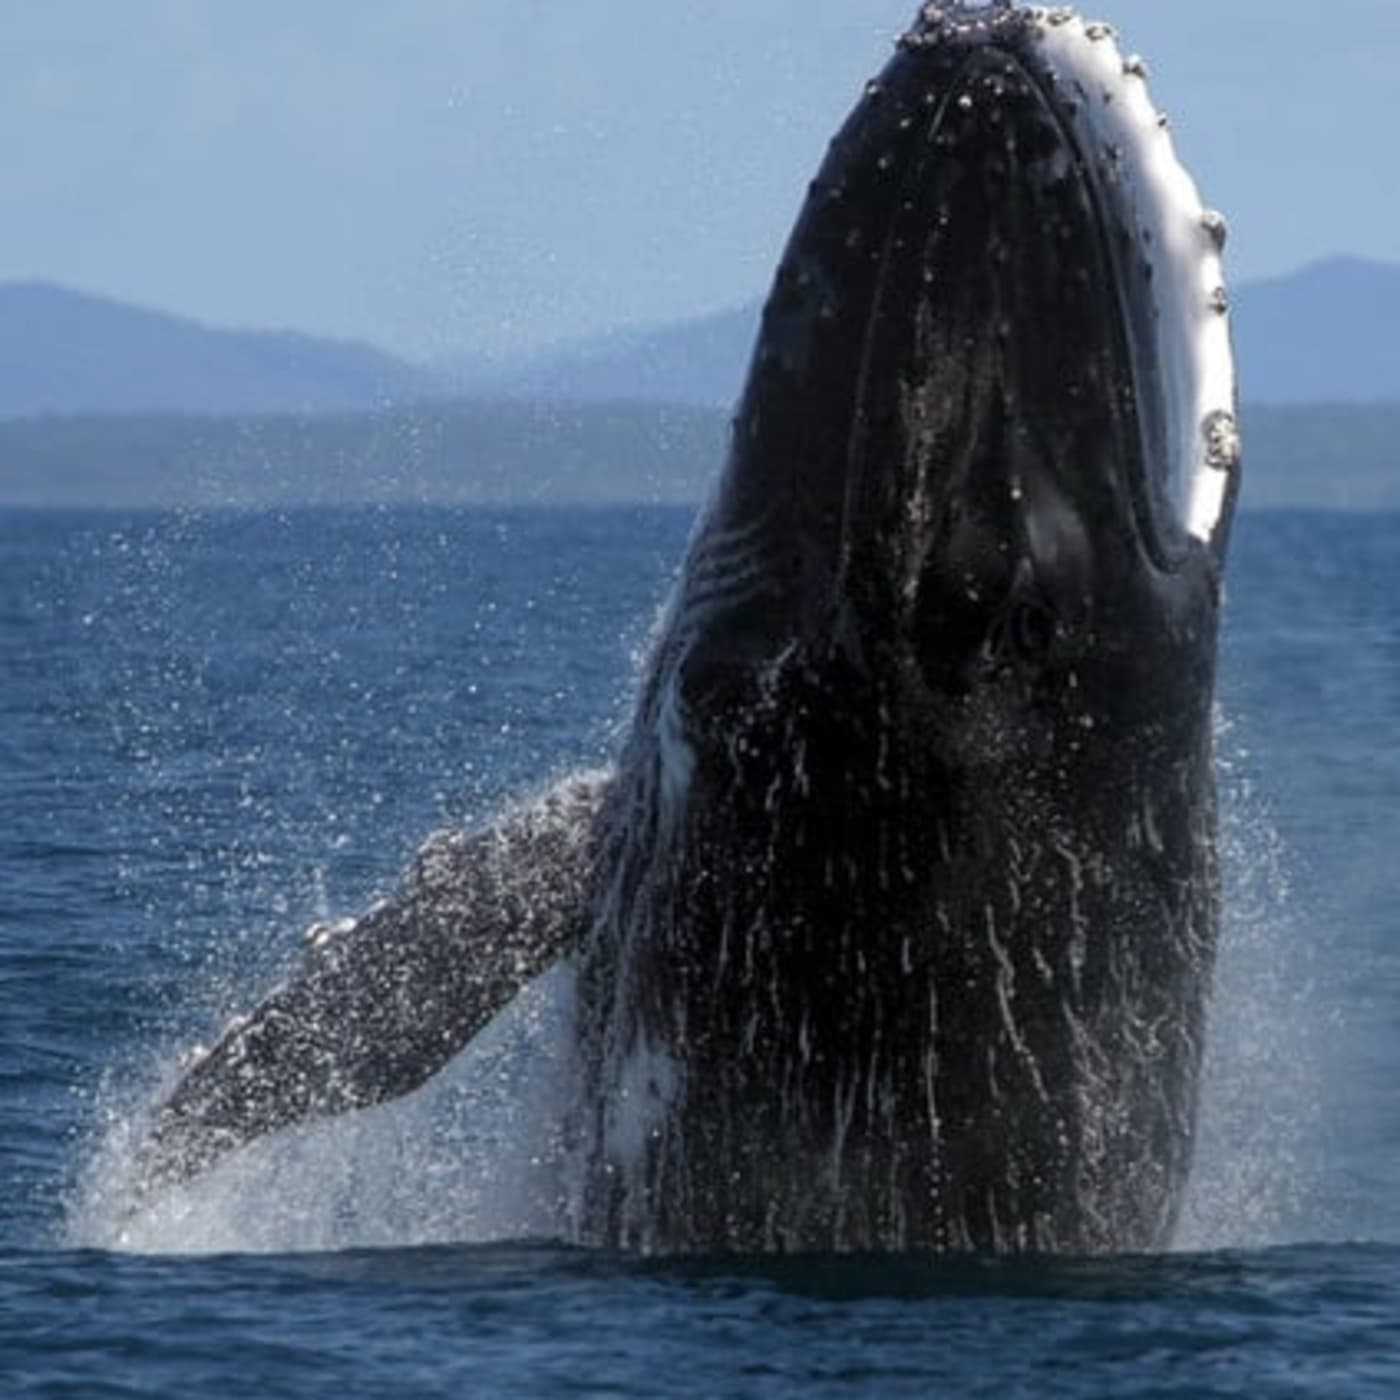 Humpback whale breaching. Coffs Harbour, New South Wales, Australia.